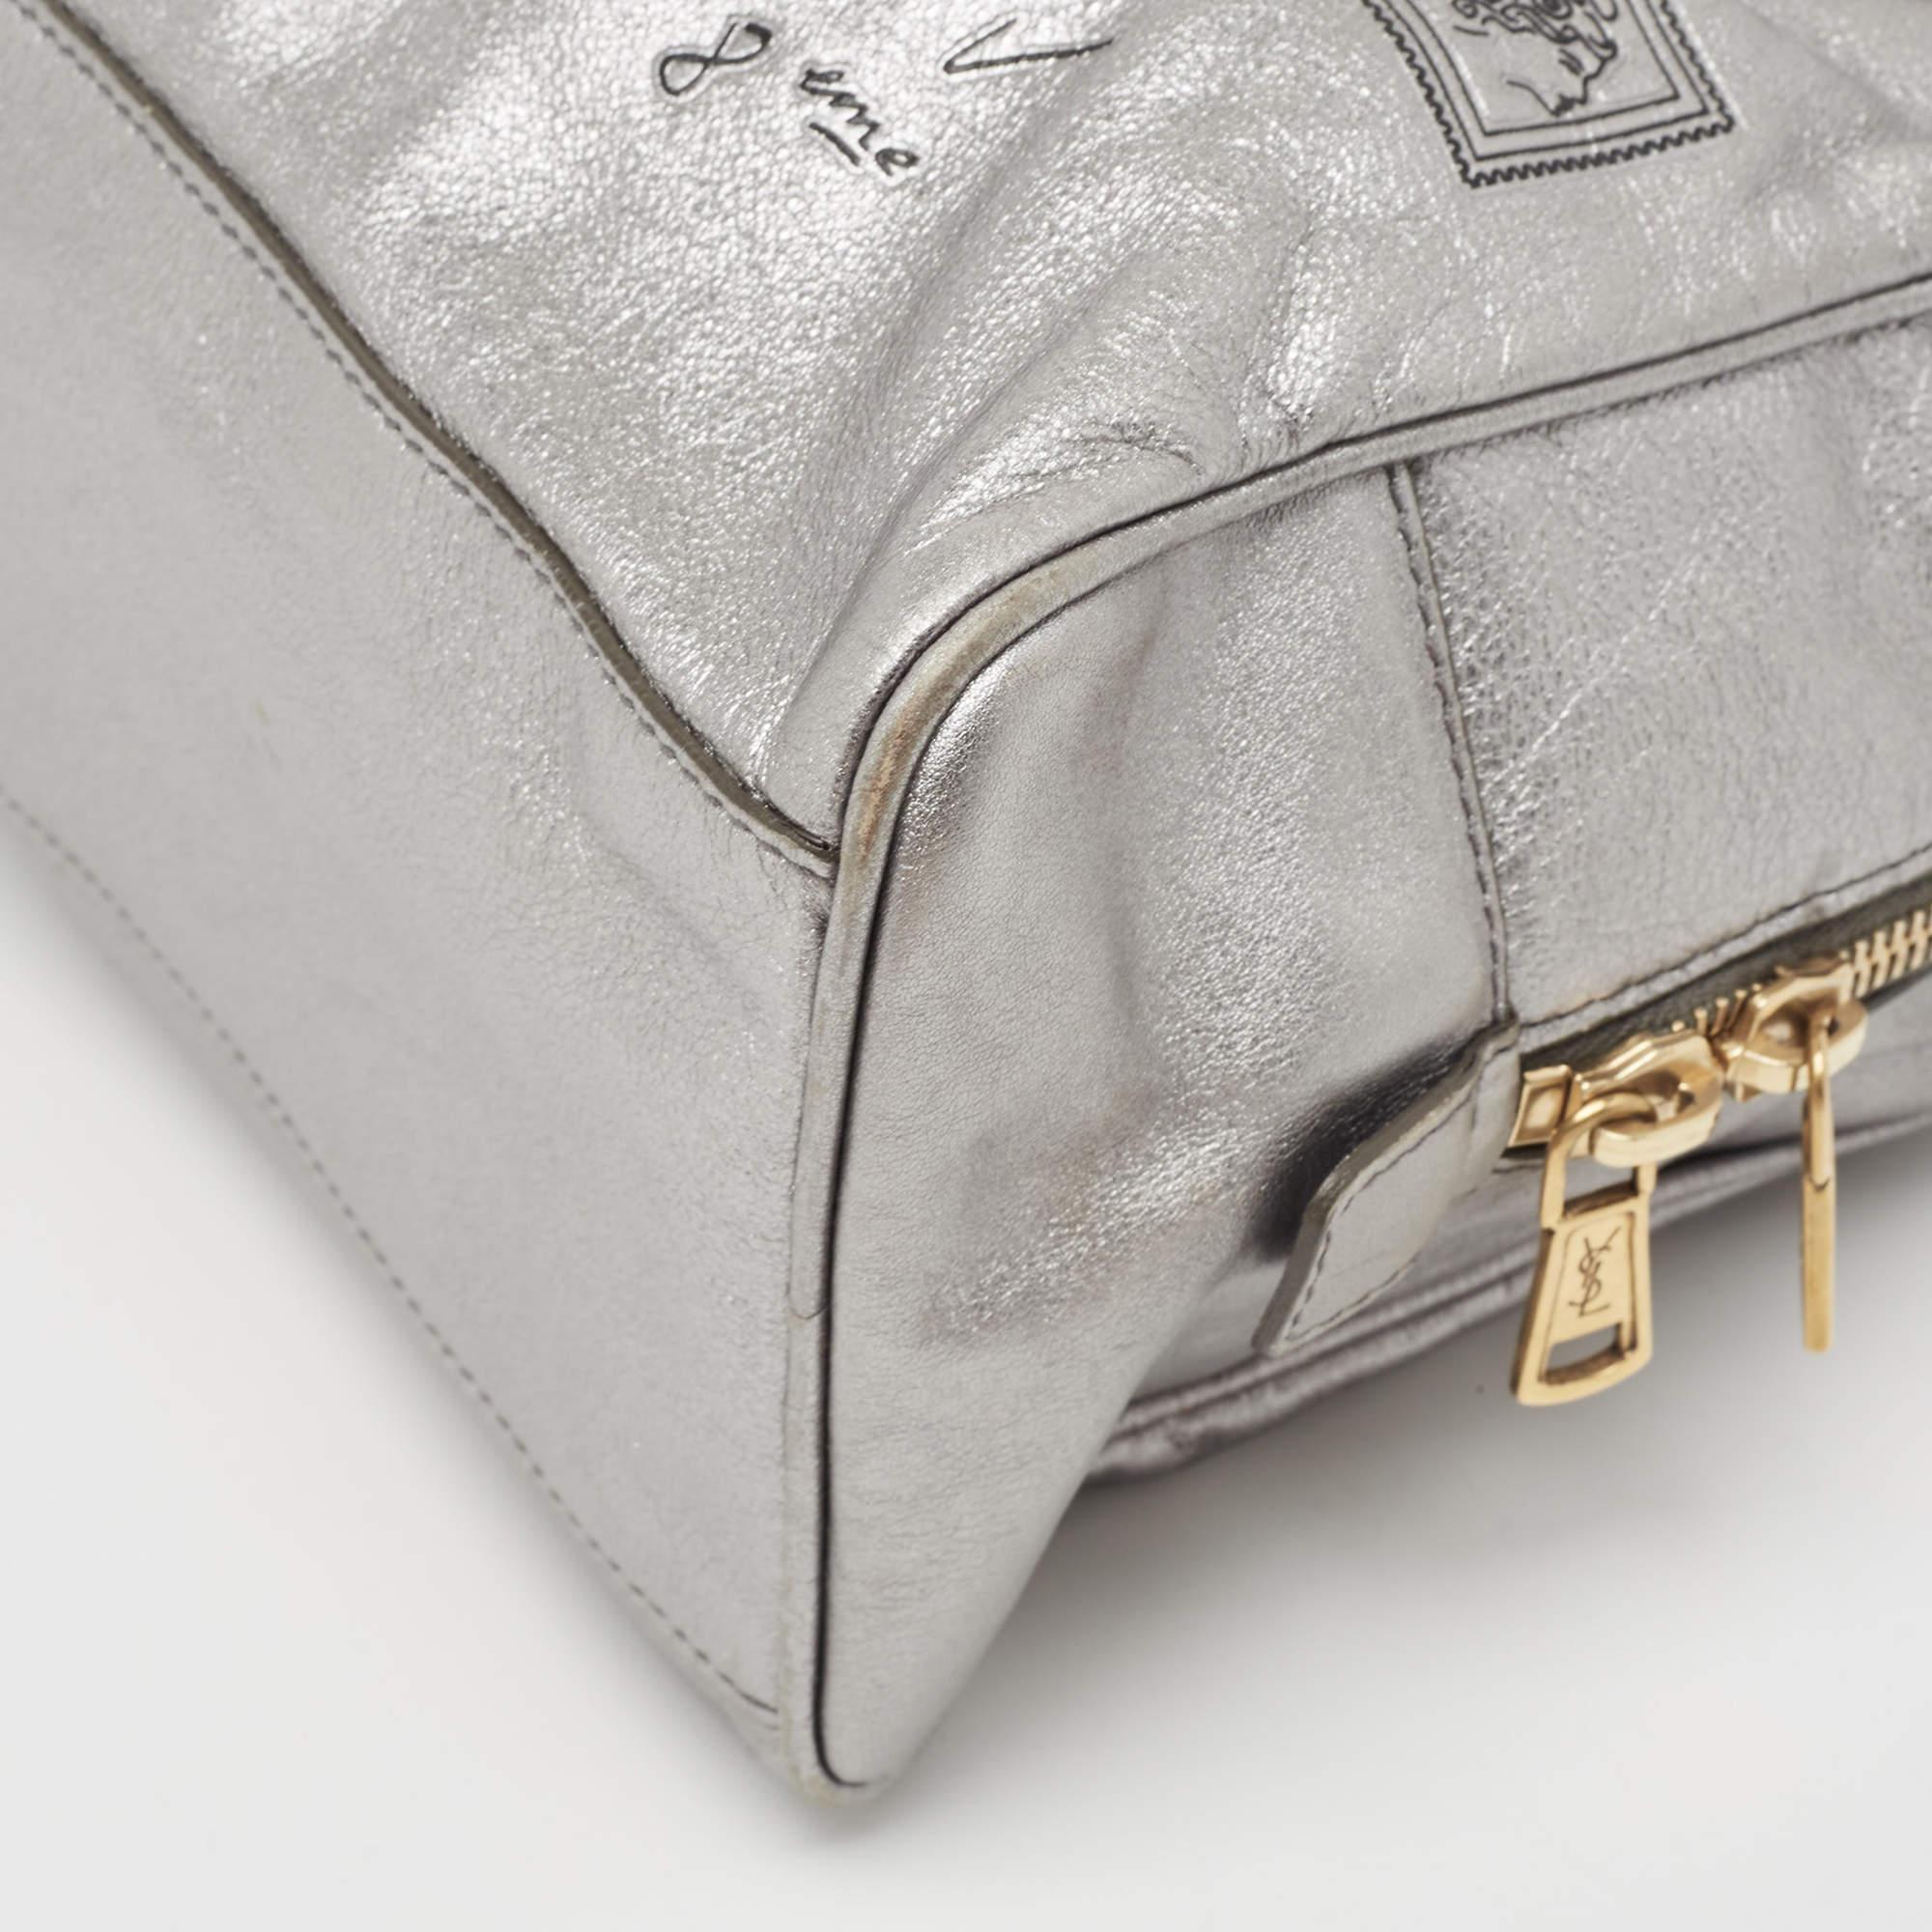 Yves Saint Laurent Silver Leather Y Mail Mini Bag 8